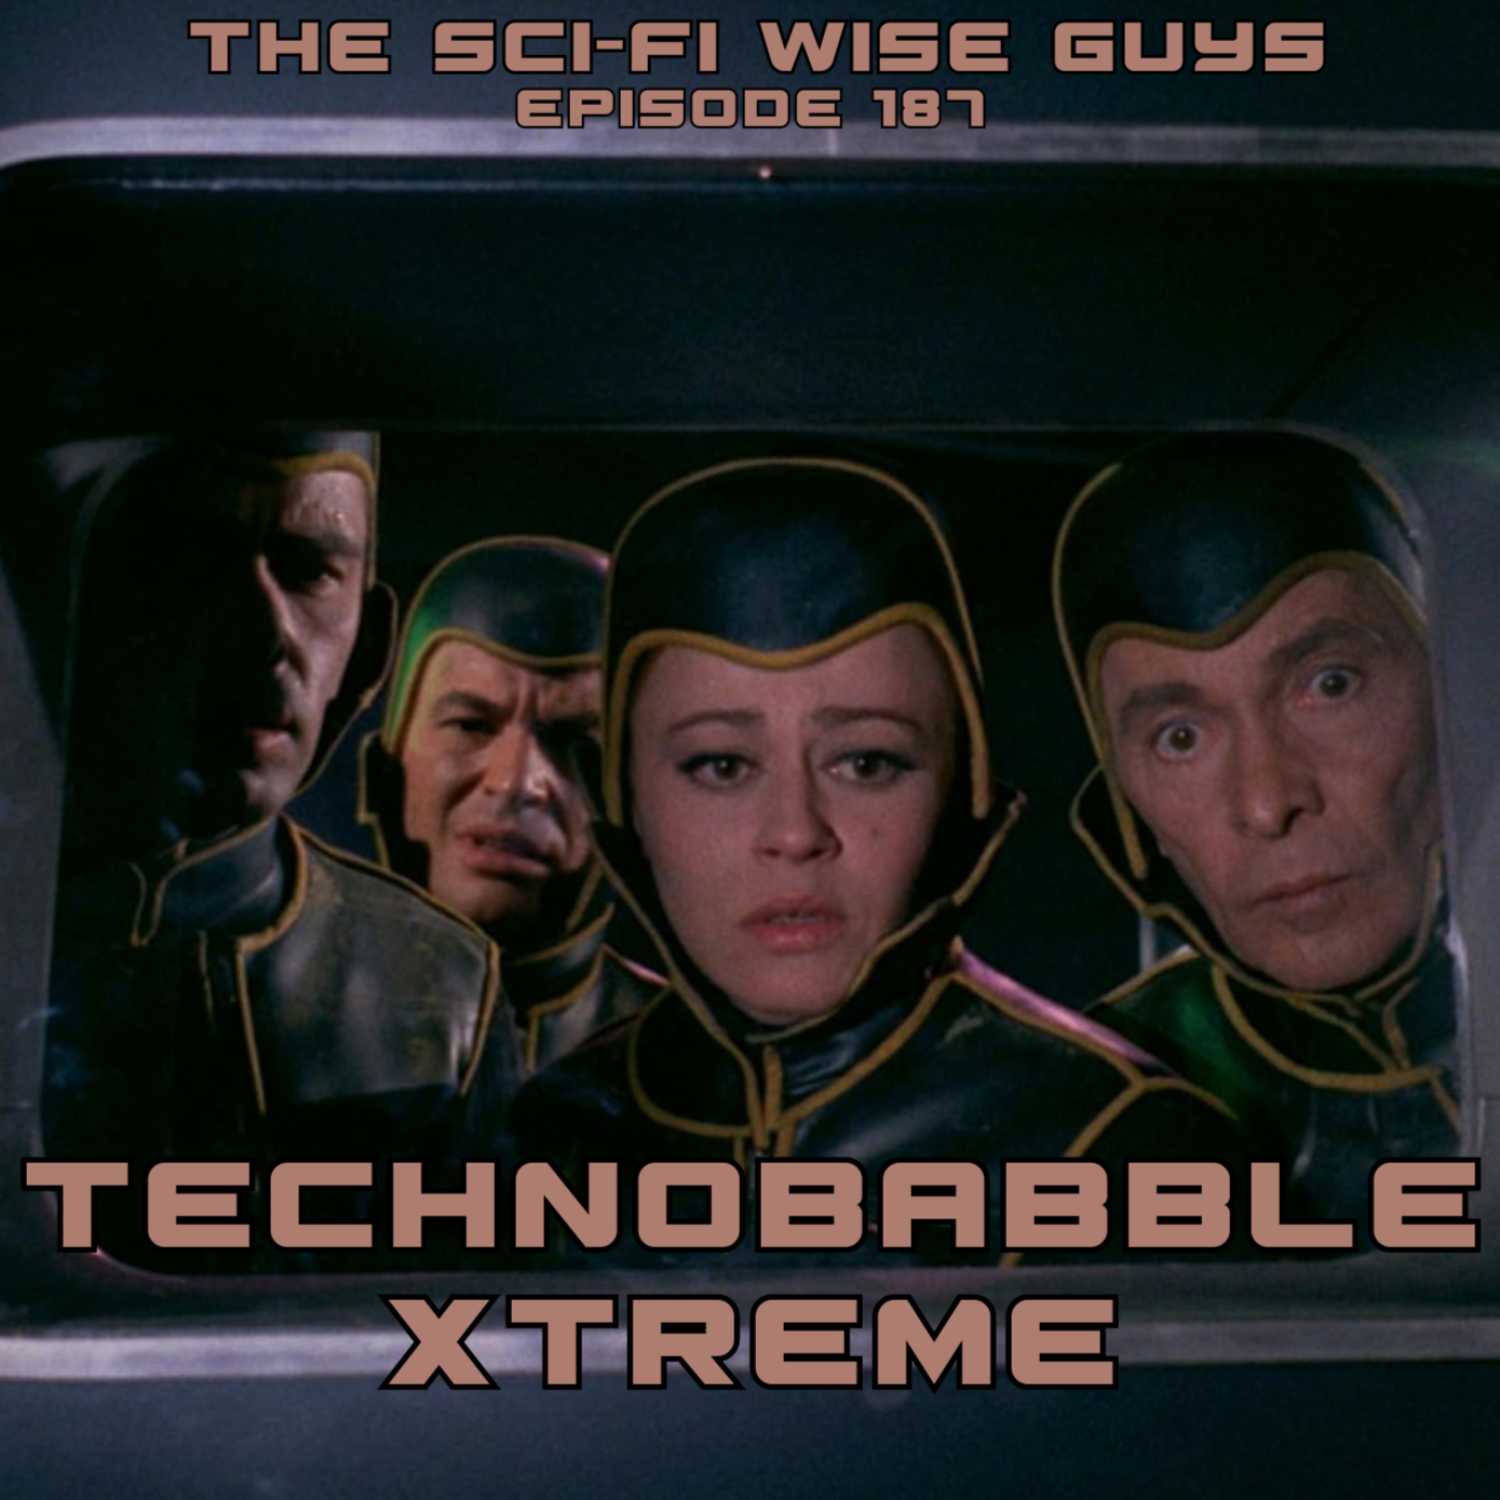 Technobabble Xtreme (Planet of the Vampires)